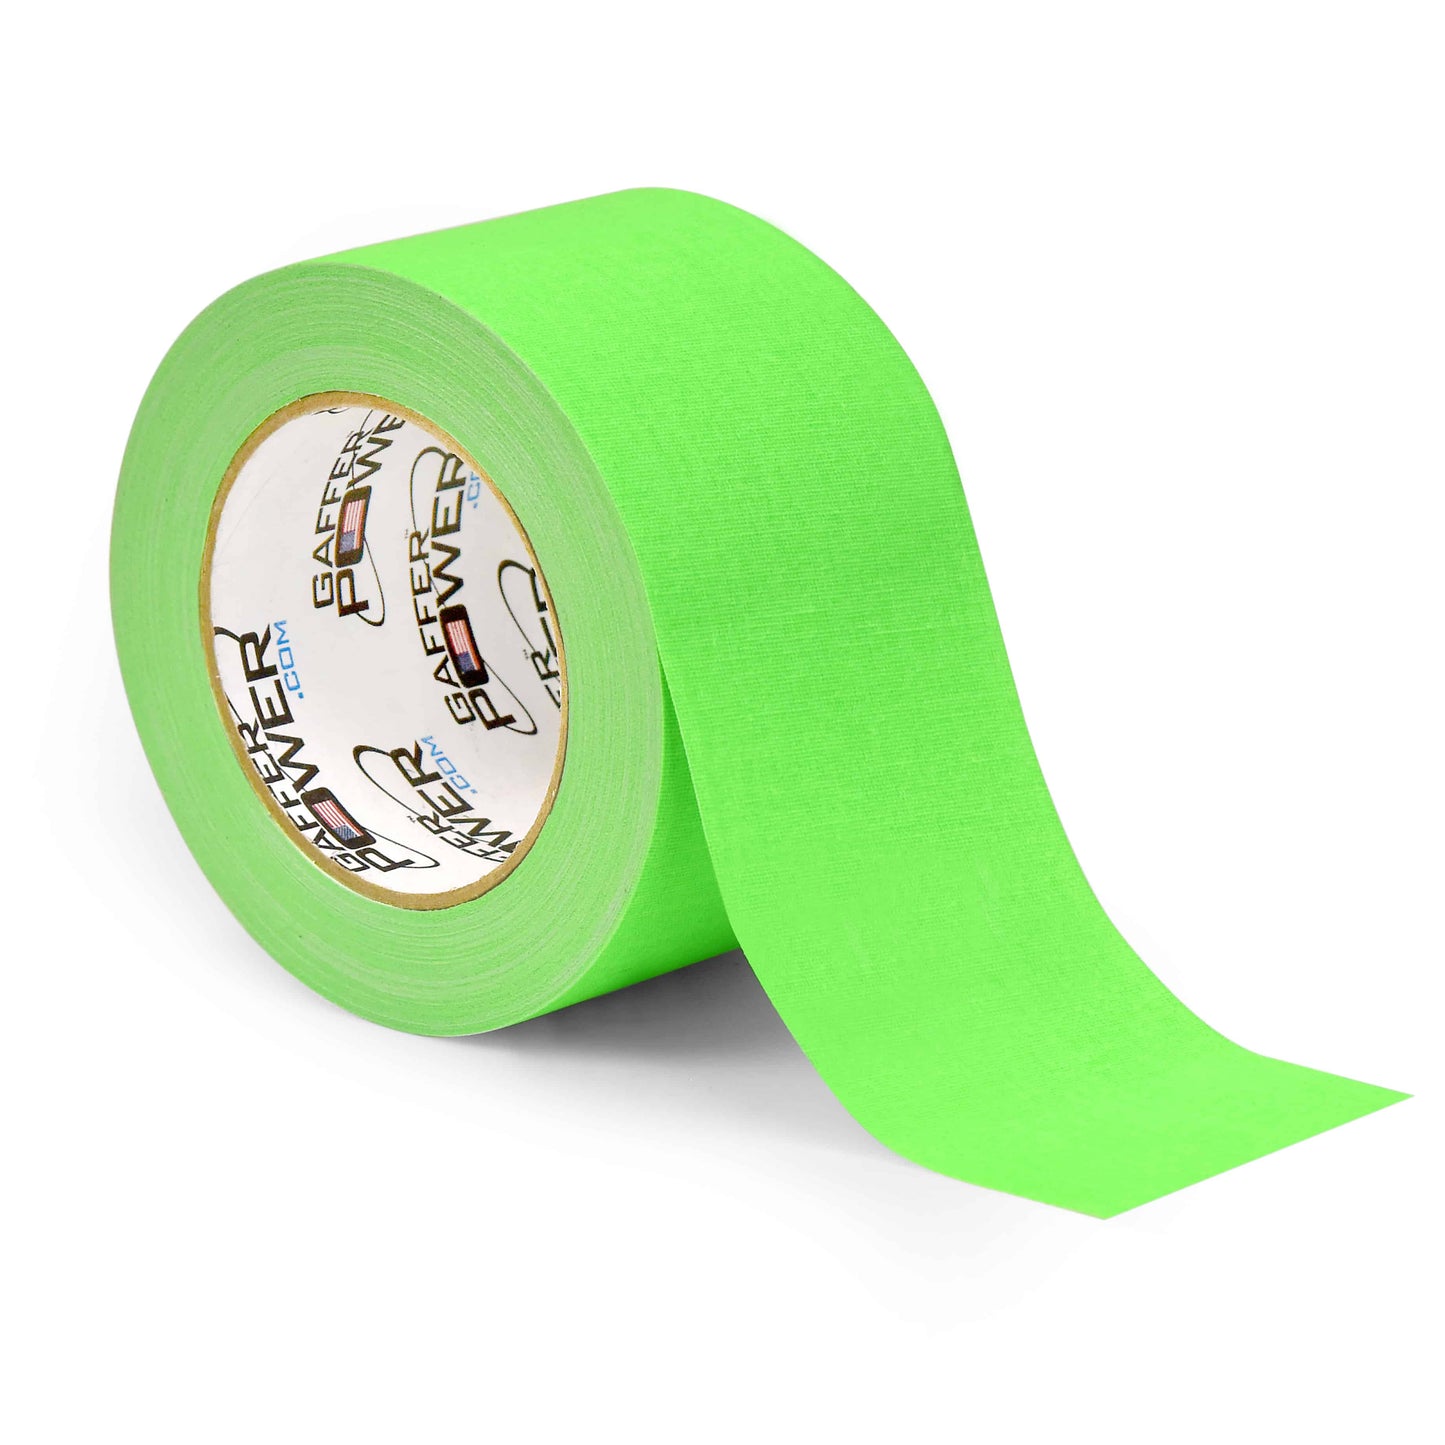 Real Professional Premium Grade Gaffer Tape Made in The USA - Heavy Duty Gaffers Tape - Non-Reflective - Multipurpose - Fluorescent Green, 3 Inch X 30 Yards